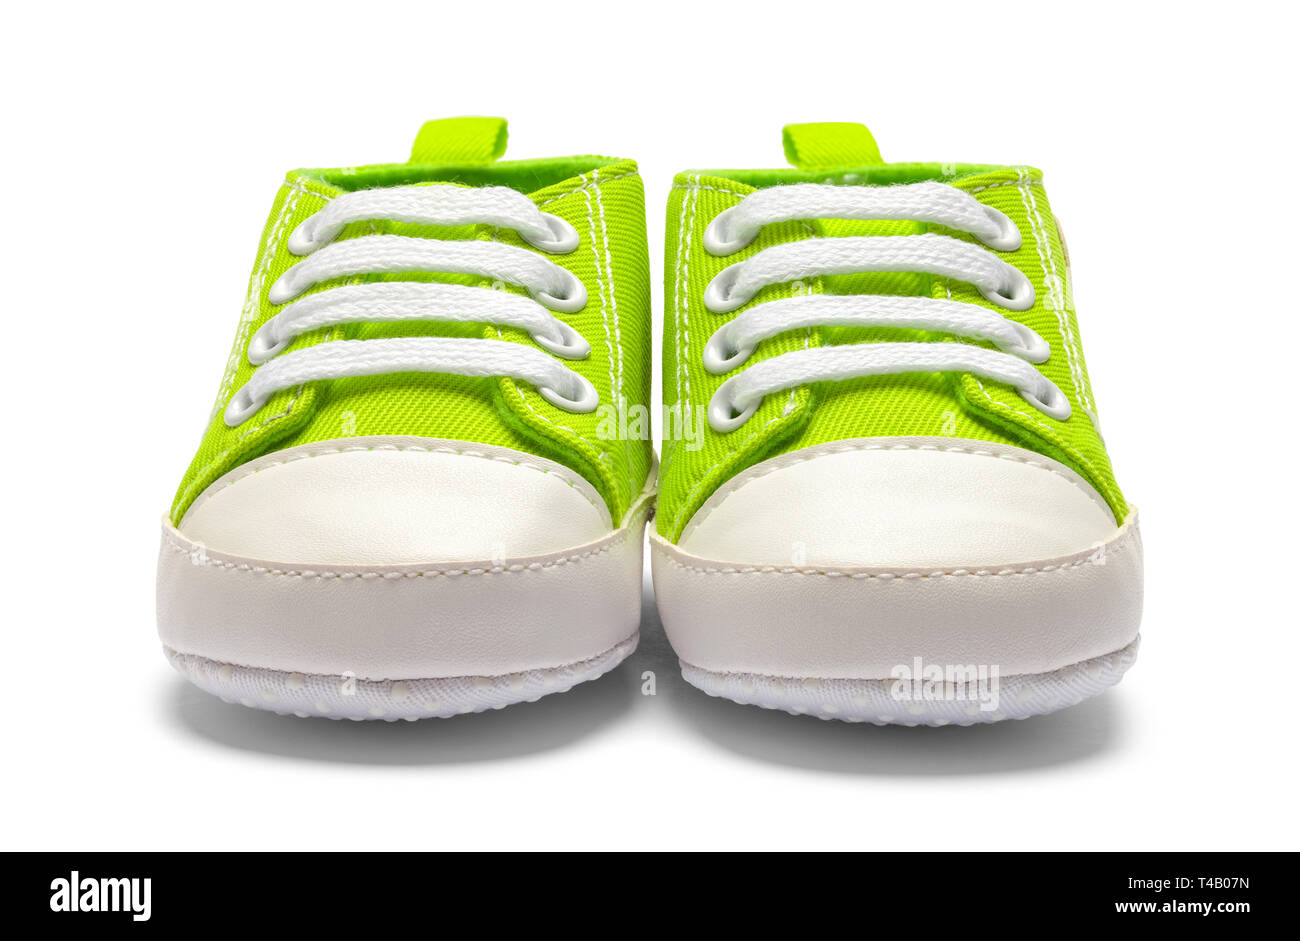 Pair Of Green Baby Shoes Front View Isolated on White Backround. Stock Photo